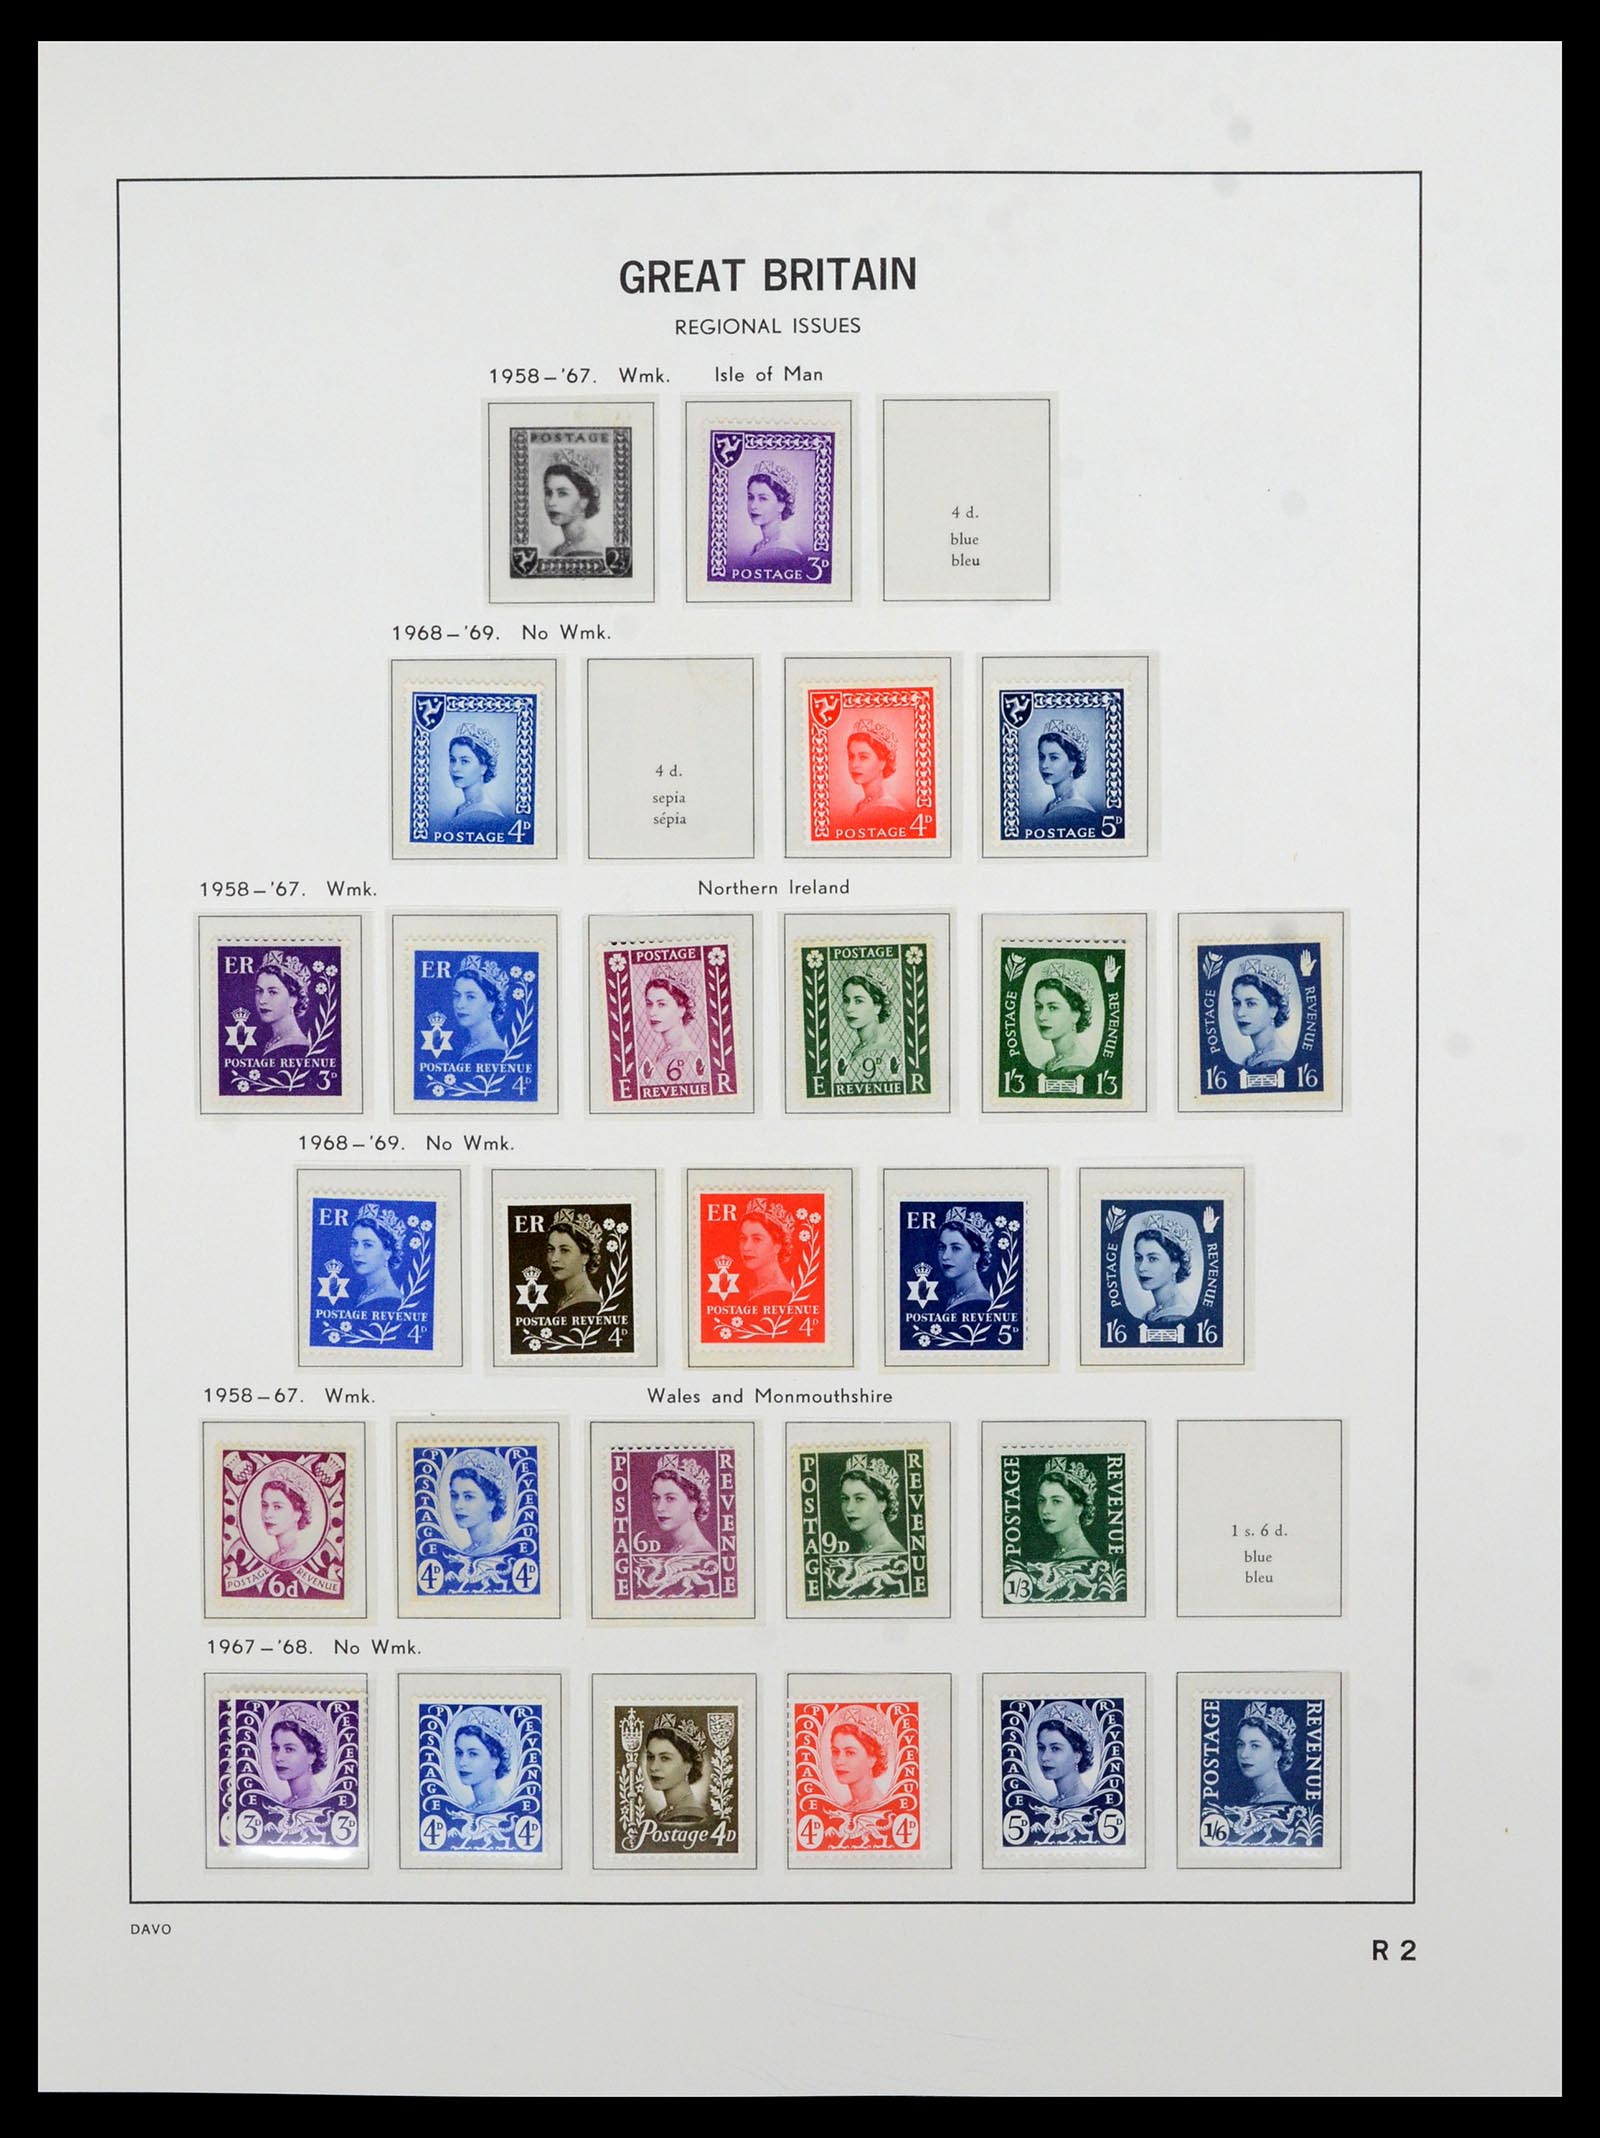 36821 049 - Stamp collection 36821 Great Britain 1856-1970.